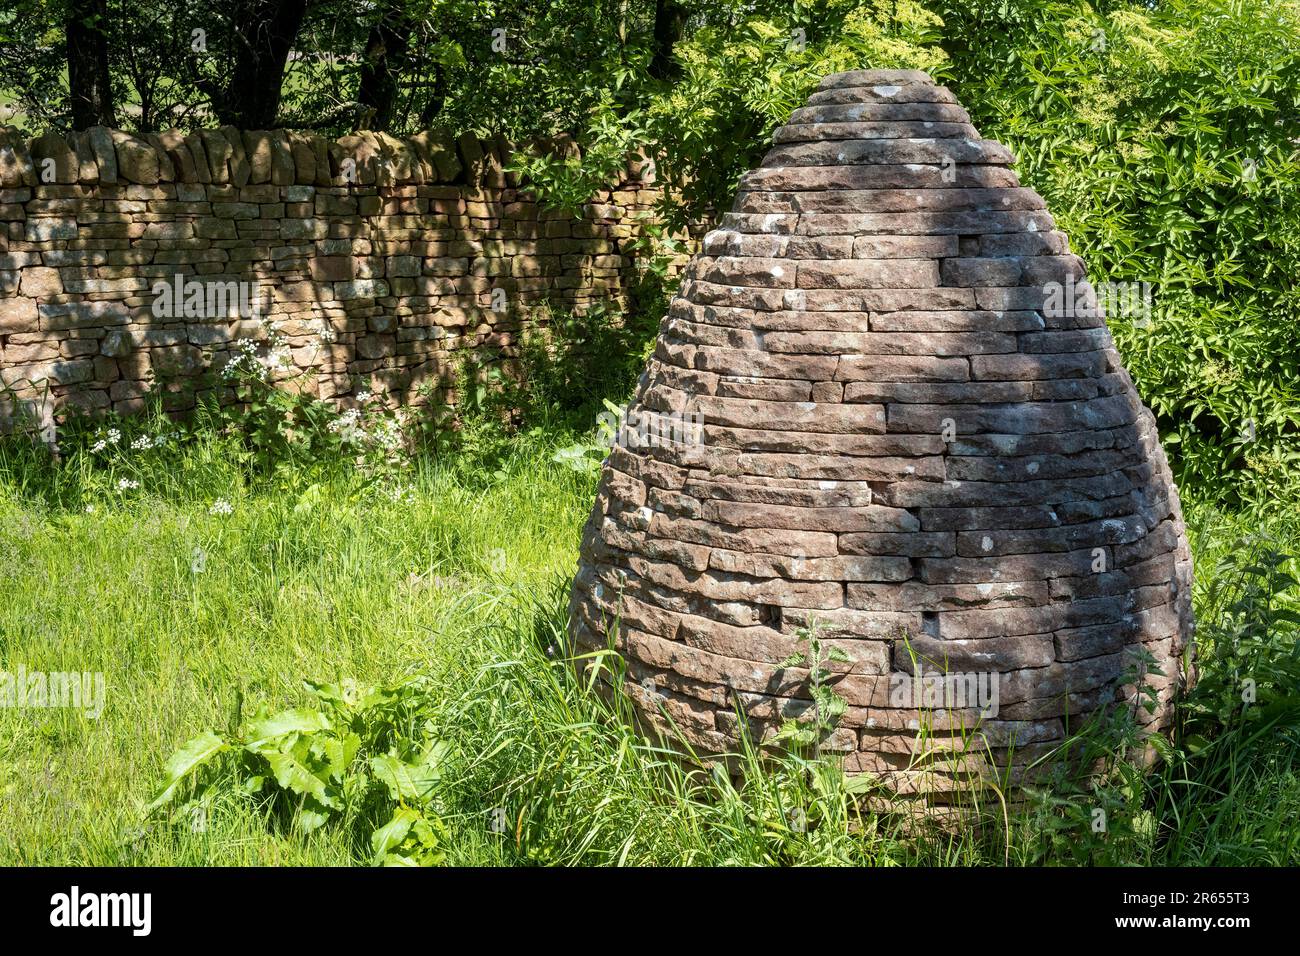 The cone in the pinfold sculpture by Andy Goldsworthy, Warcop village, Eden Valley, Cumbria, UK Stock Photo